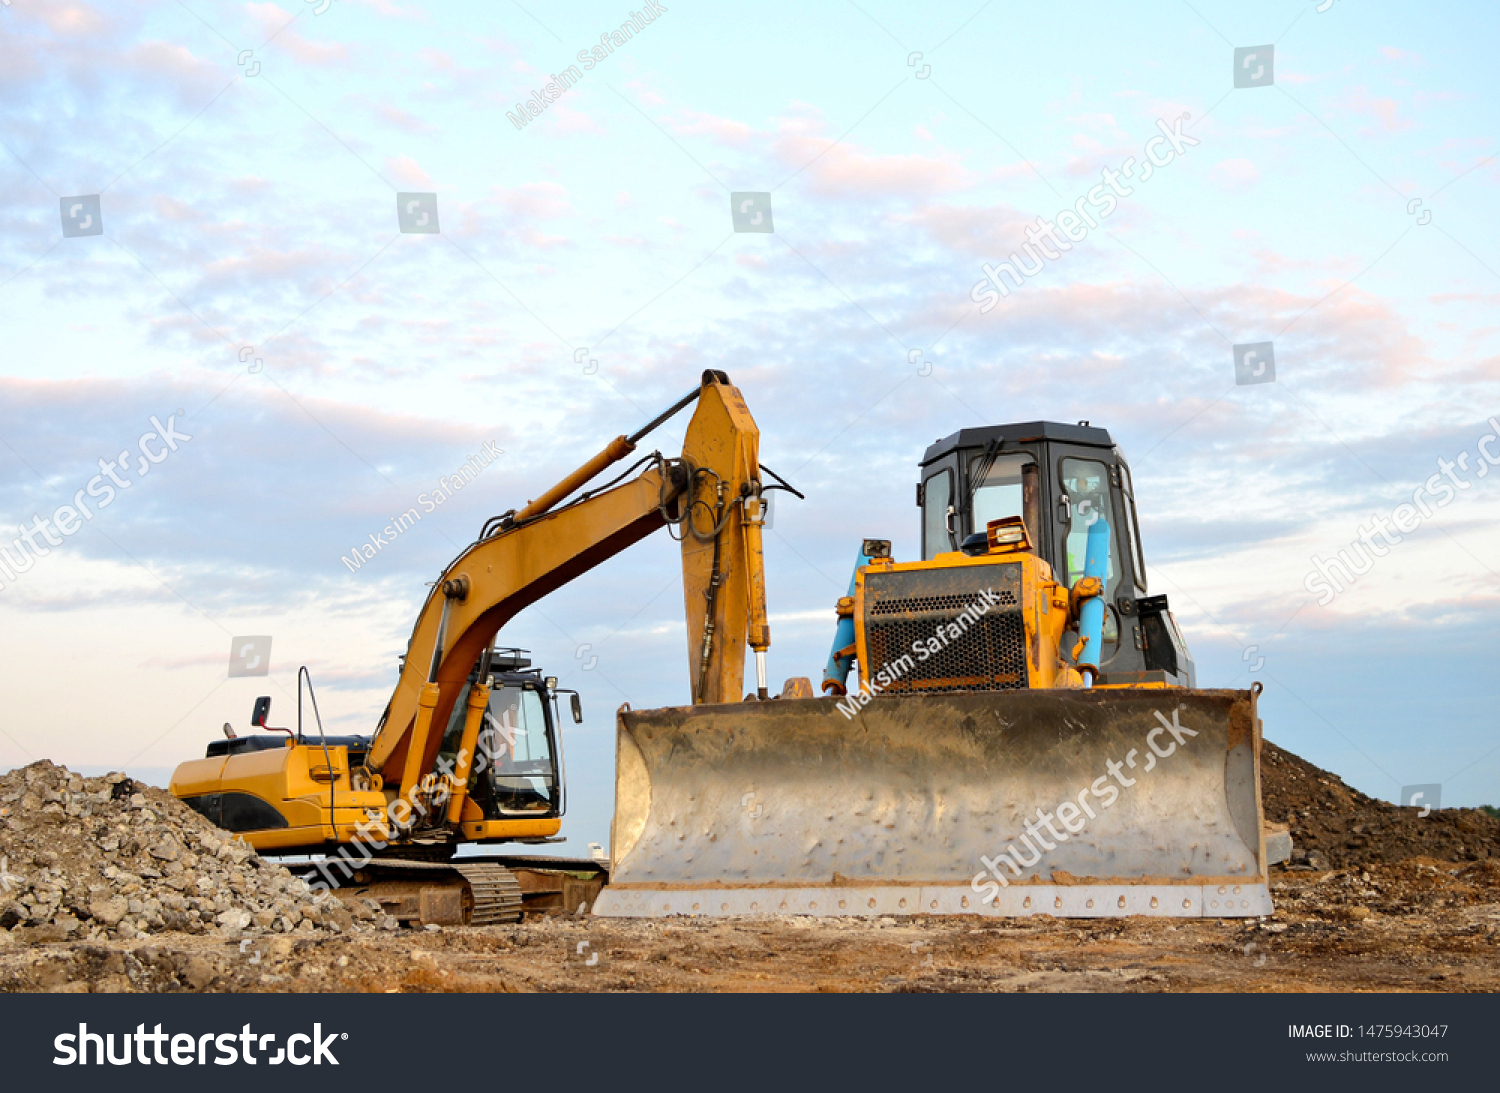 Track-type bulldozer, earth-moving equipment. Land clearing, grading, pool excavation, utility trenching, utility trenching and foundation digging during of large construction jobs.  #1475943047